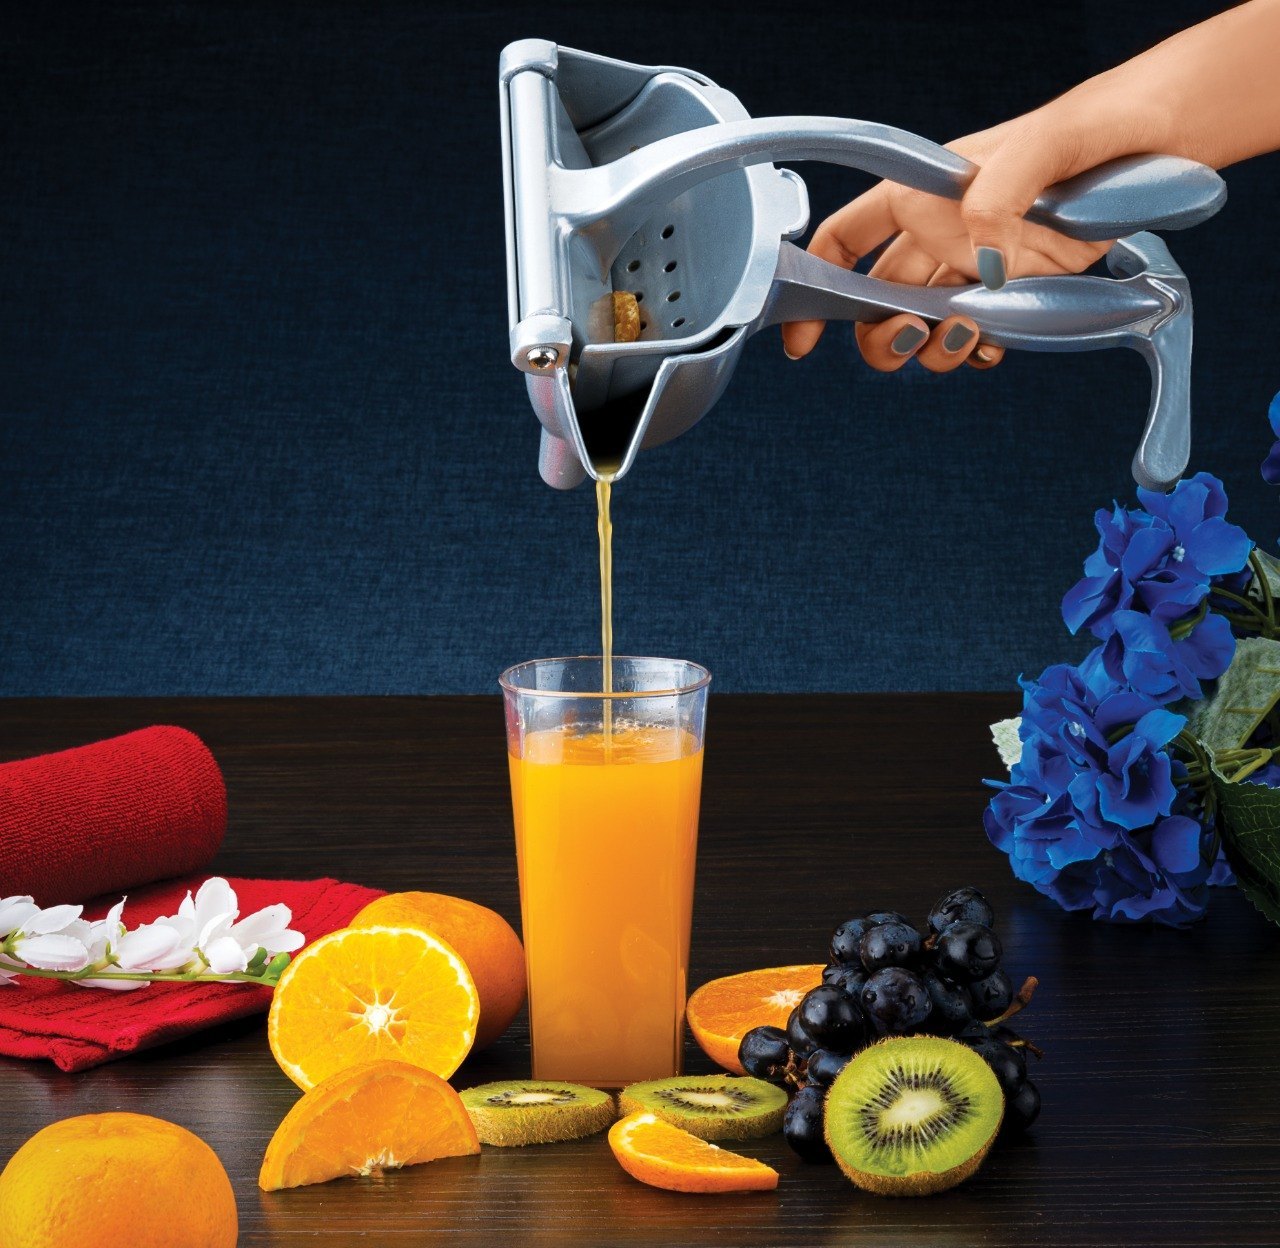 How To Use A Handheld Juicer